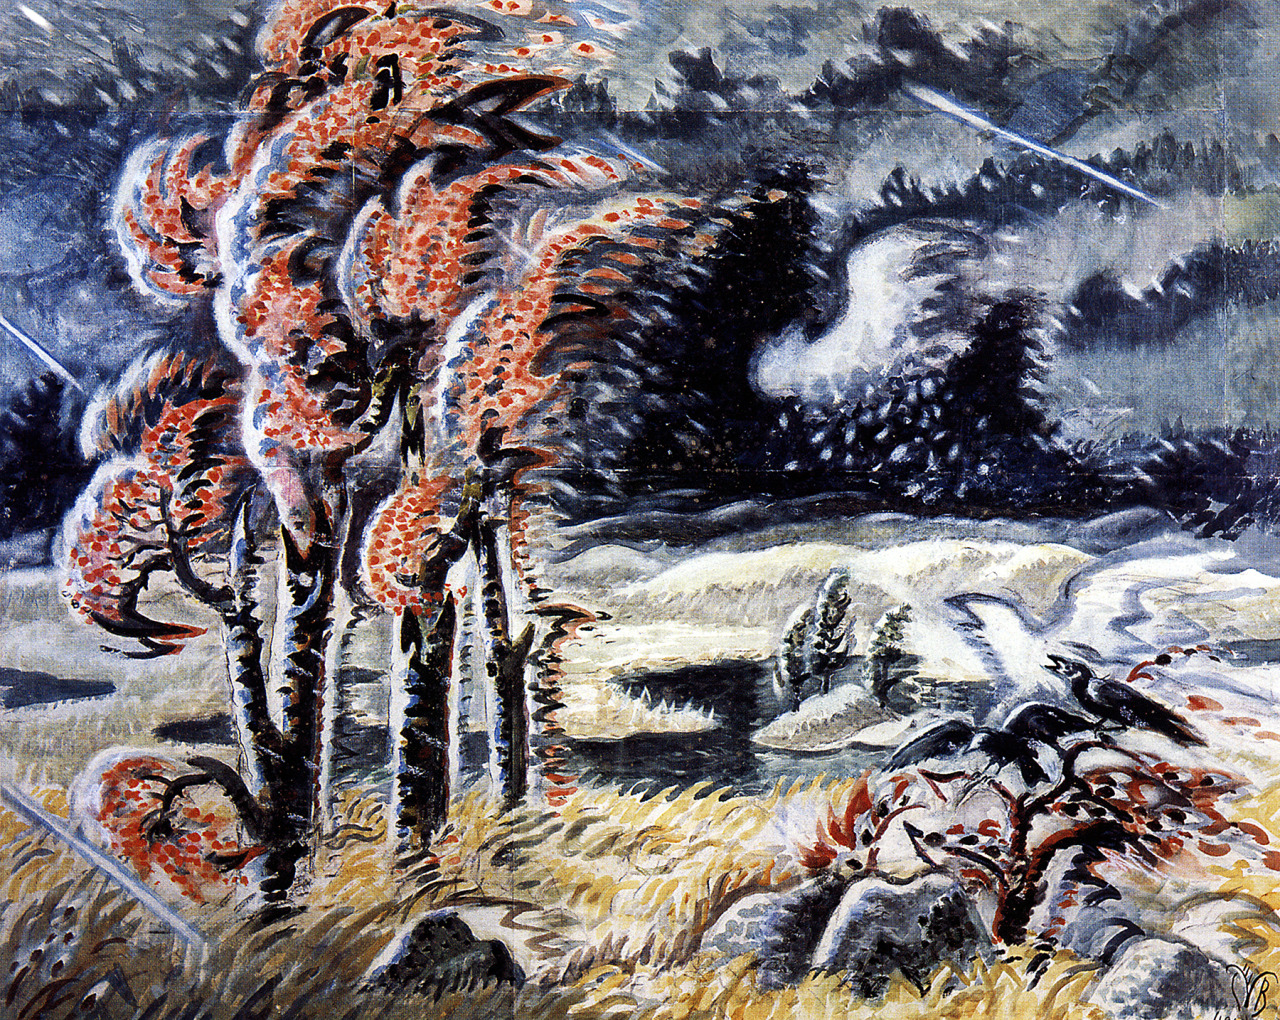 peira:
“Charles Burchfield: Northwind in March (1960-1966) watercolor
”